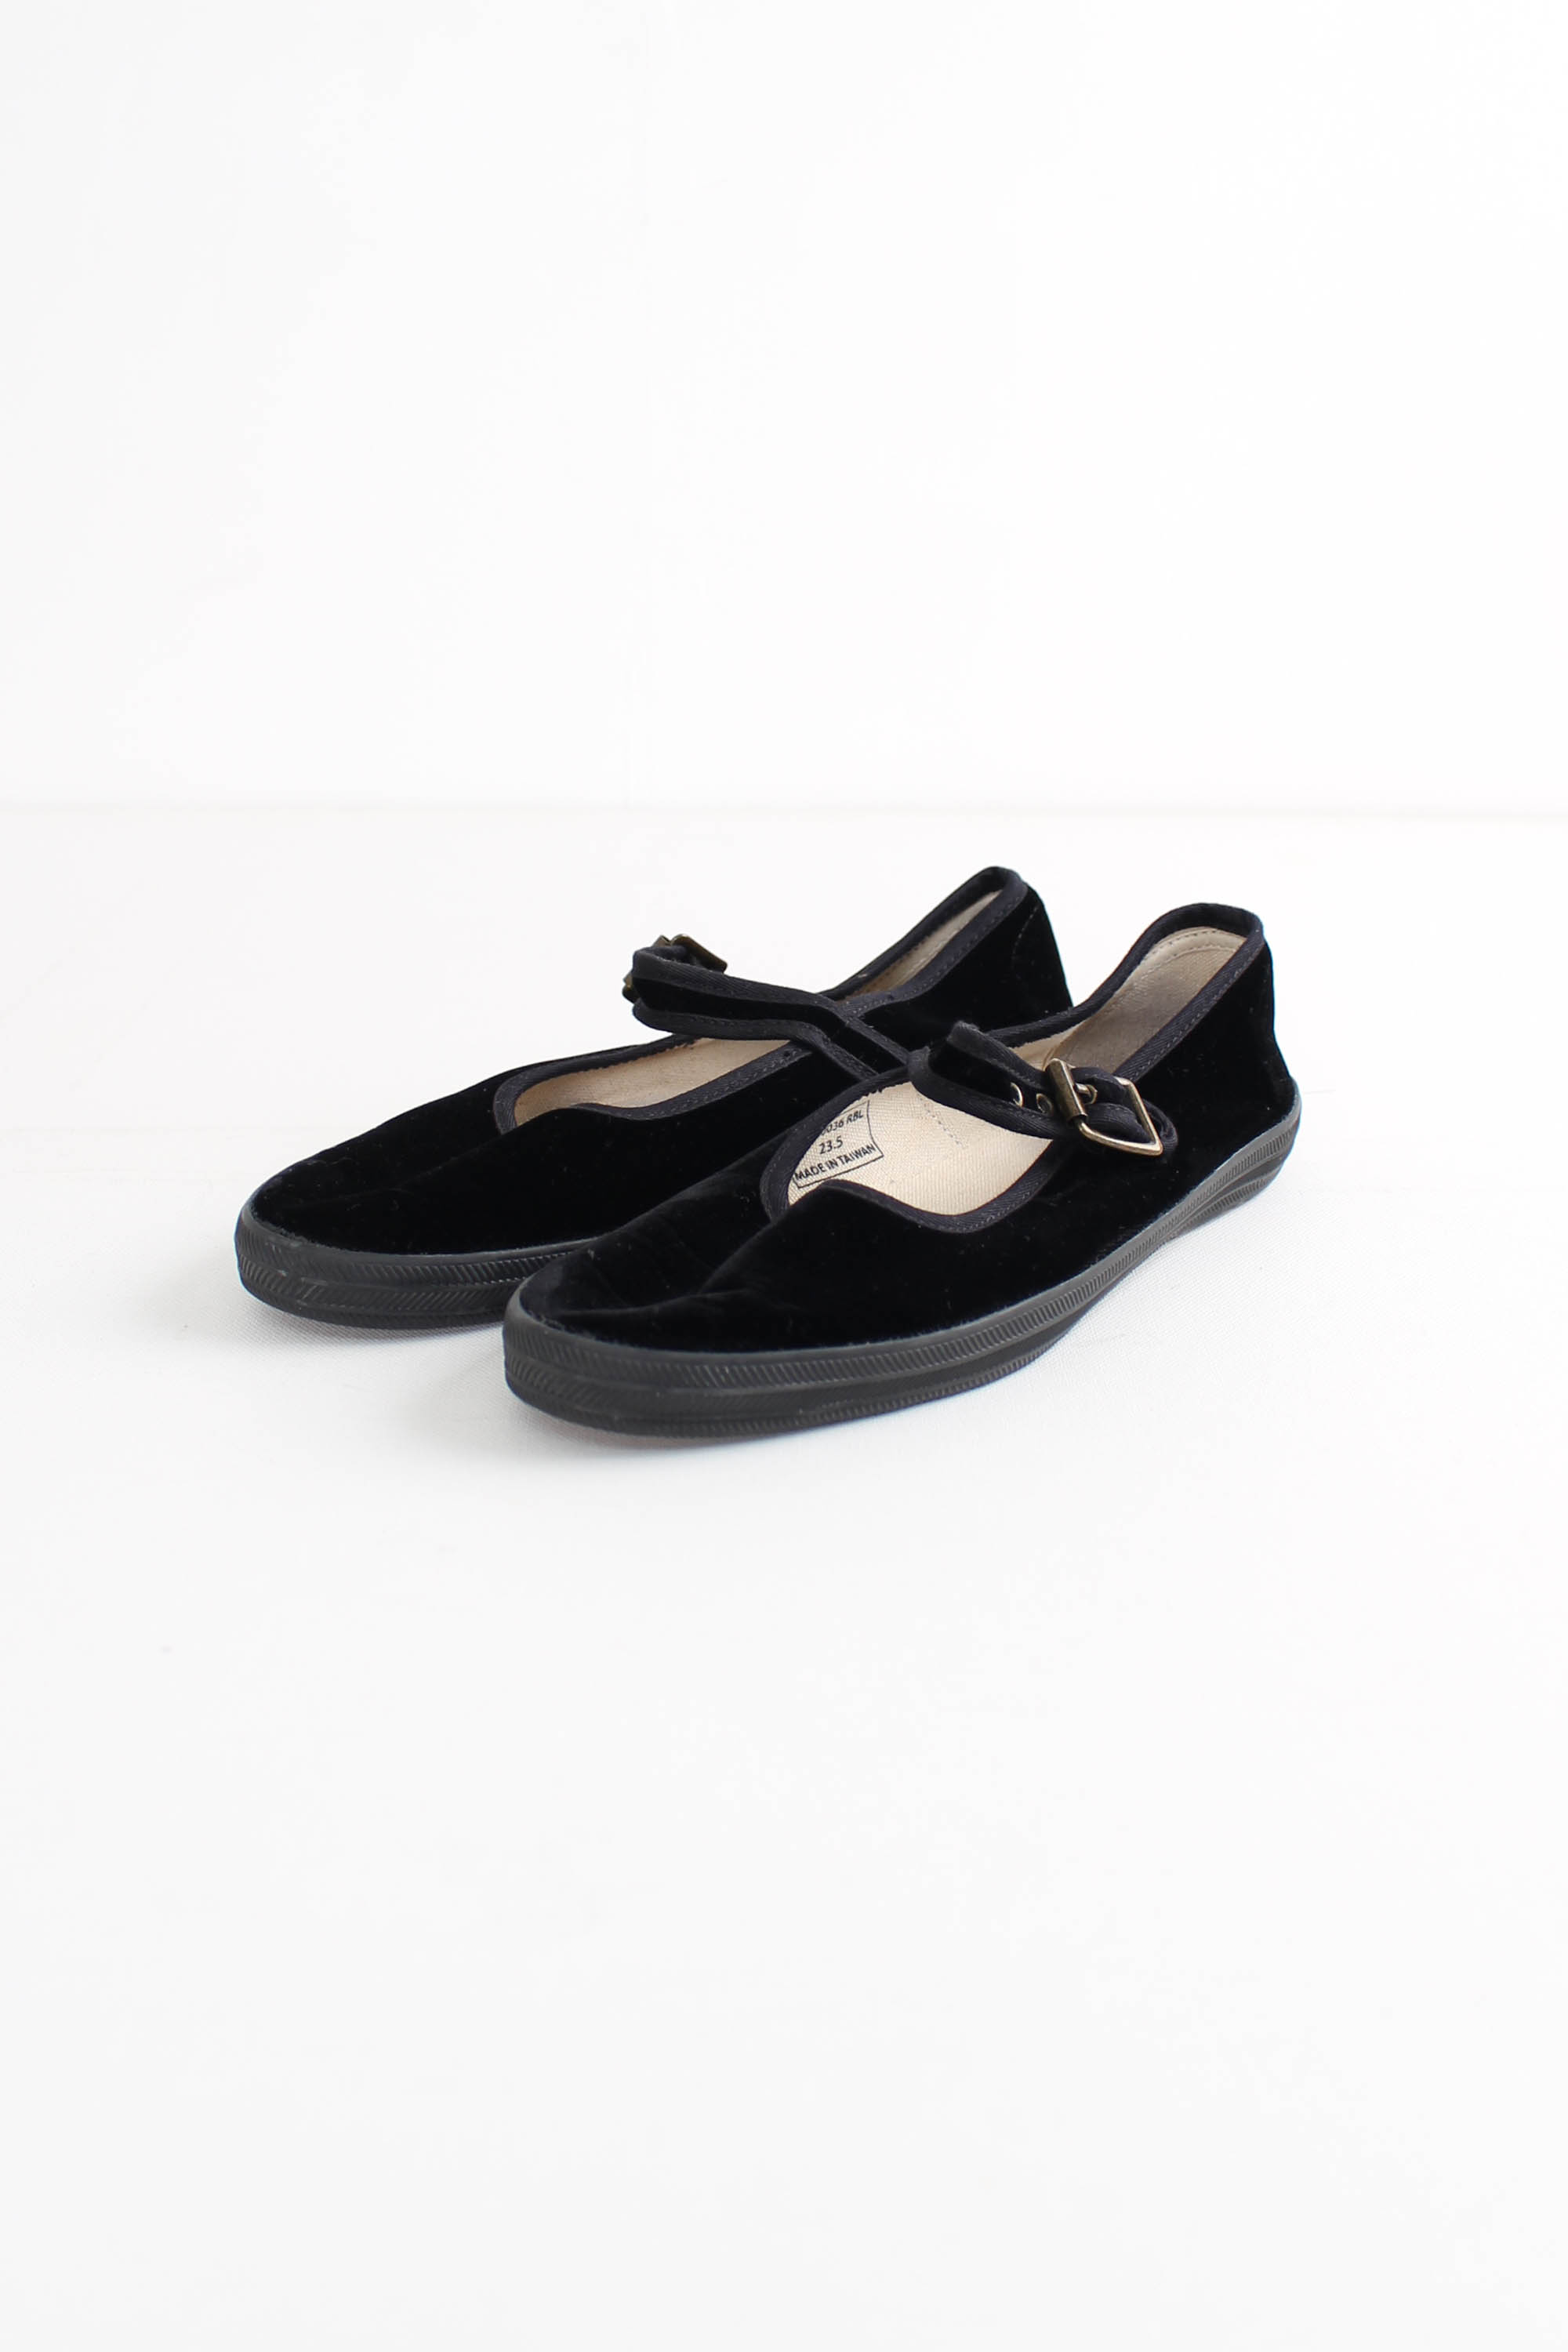 ORCIVAL Mary Jane shoes